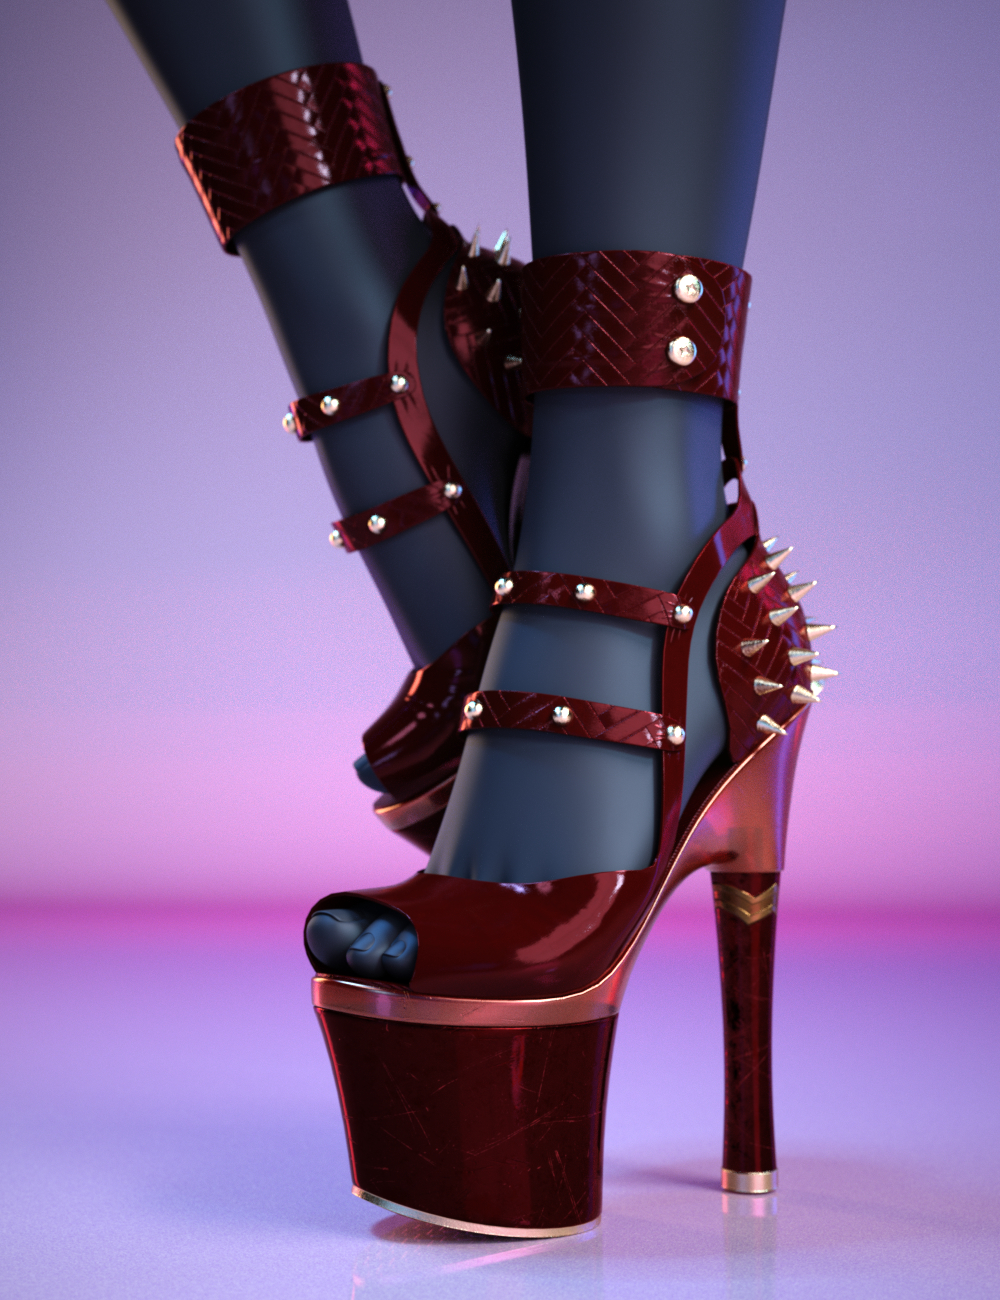 Luna High Heels Beta for Genesis 8 and 8.1 Females by: HM, 3D Models by Daz 3D